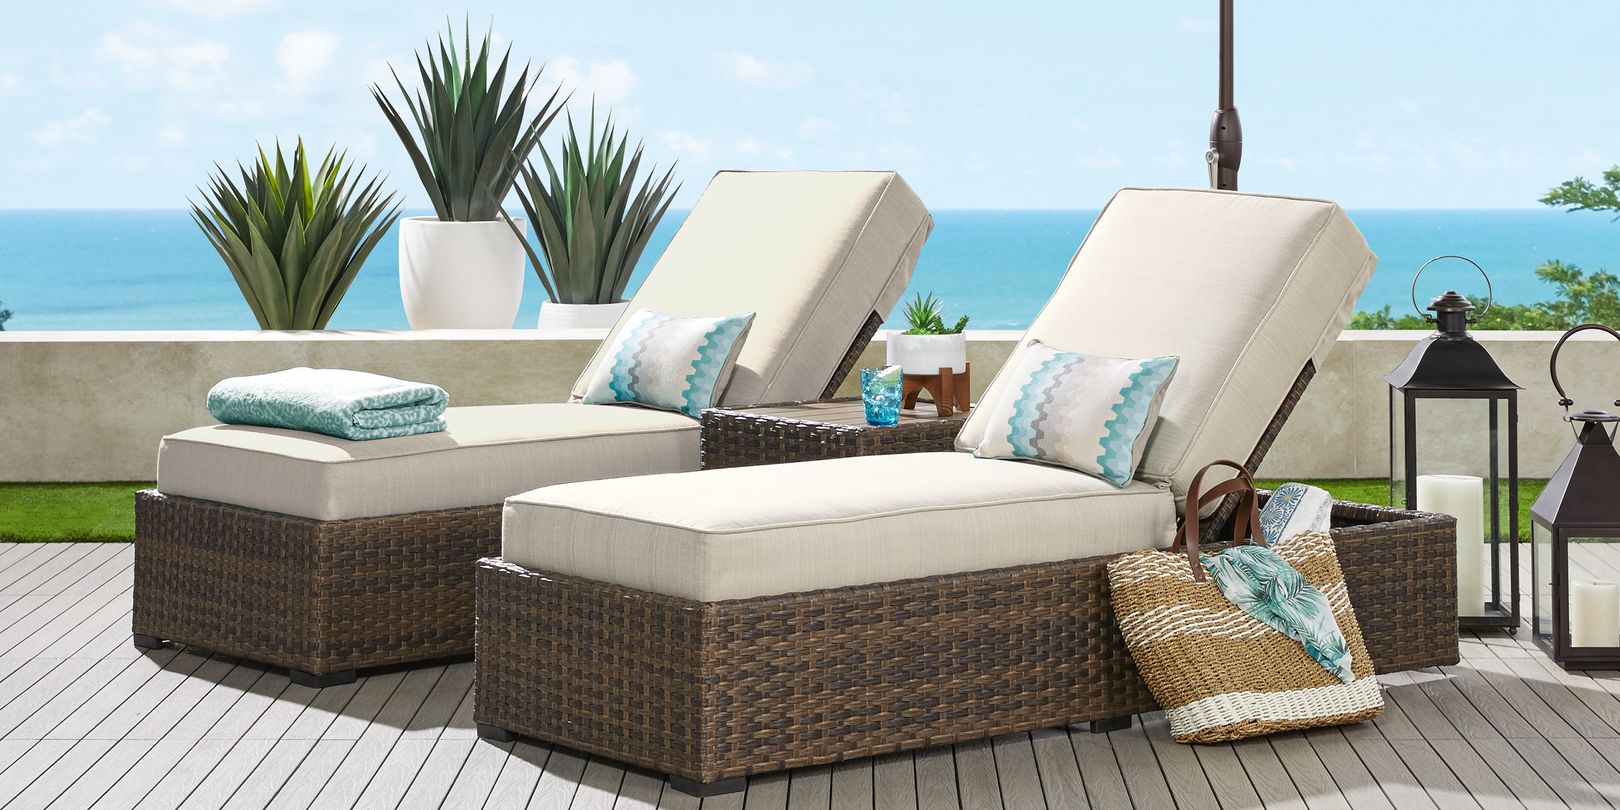 Photo of a pair of brown wicker chaise lounges with a matching end table on a patio